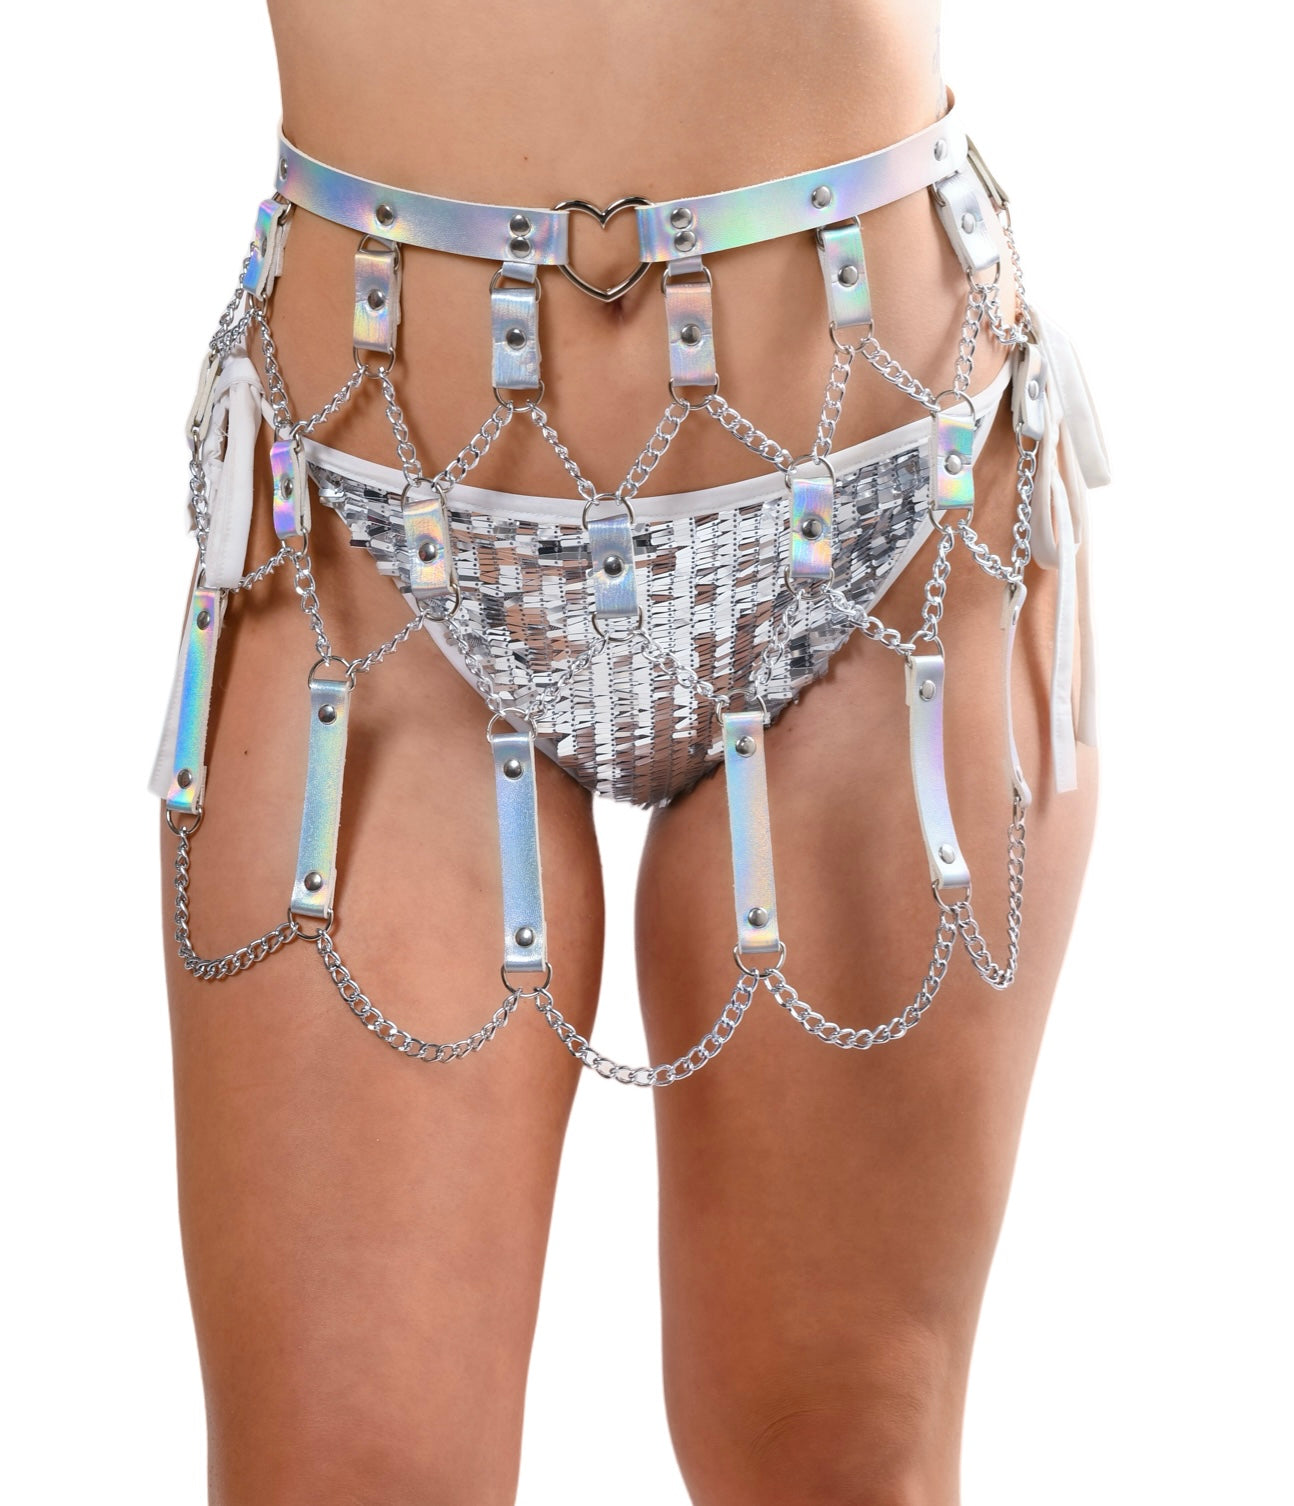 Holographic Heart Harness Set